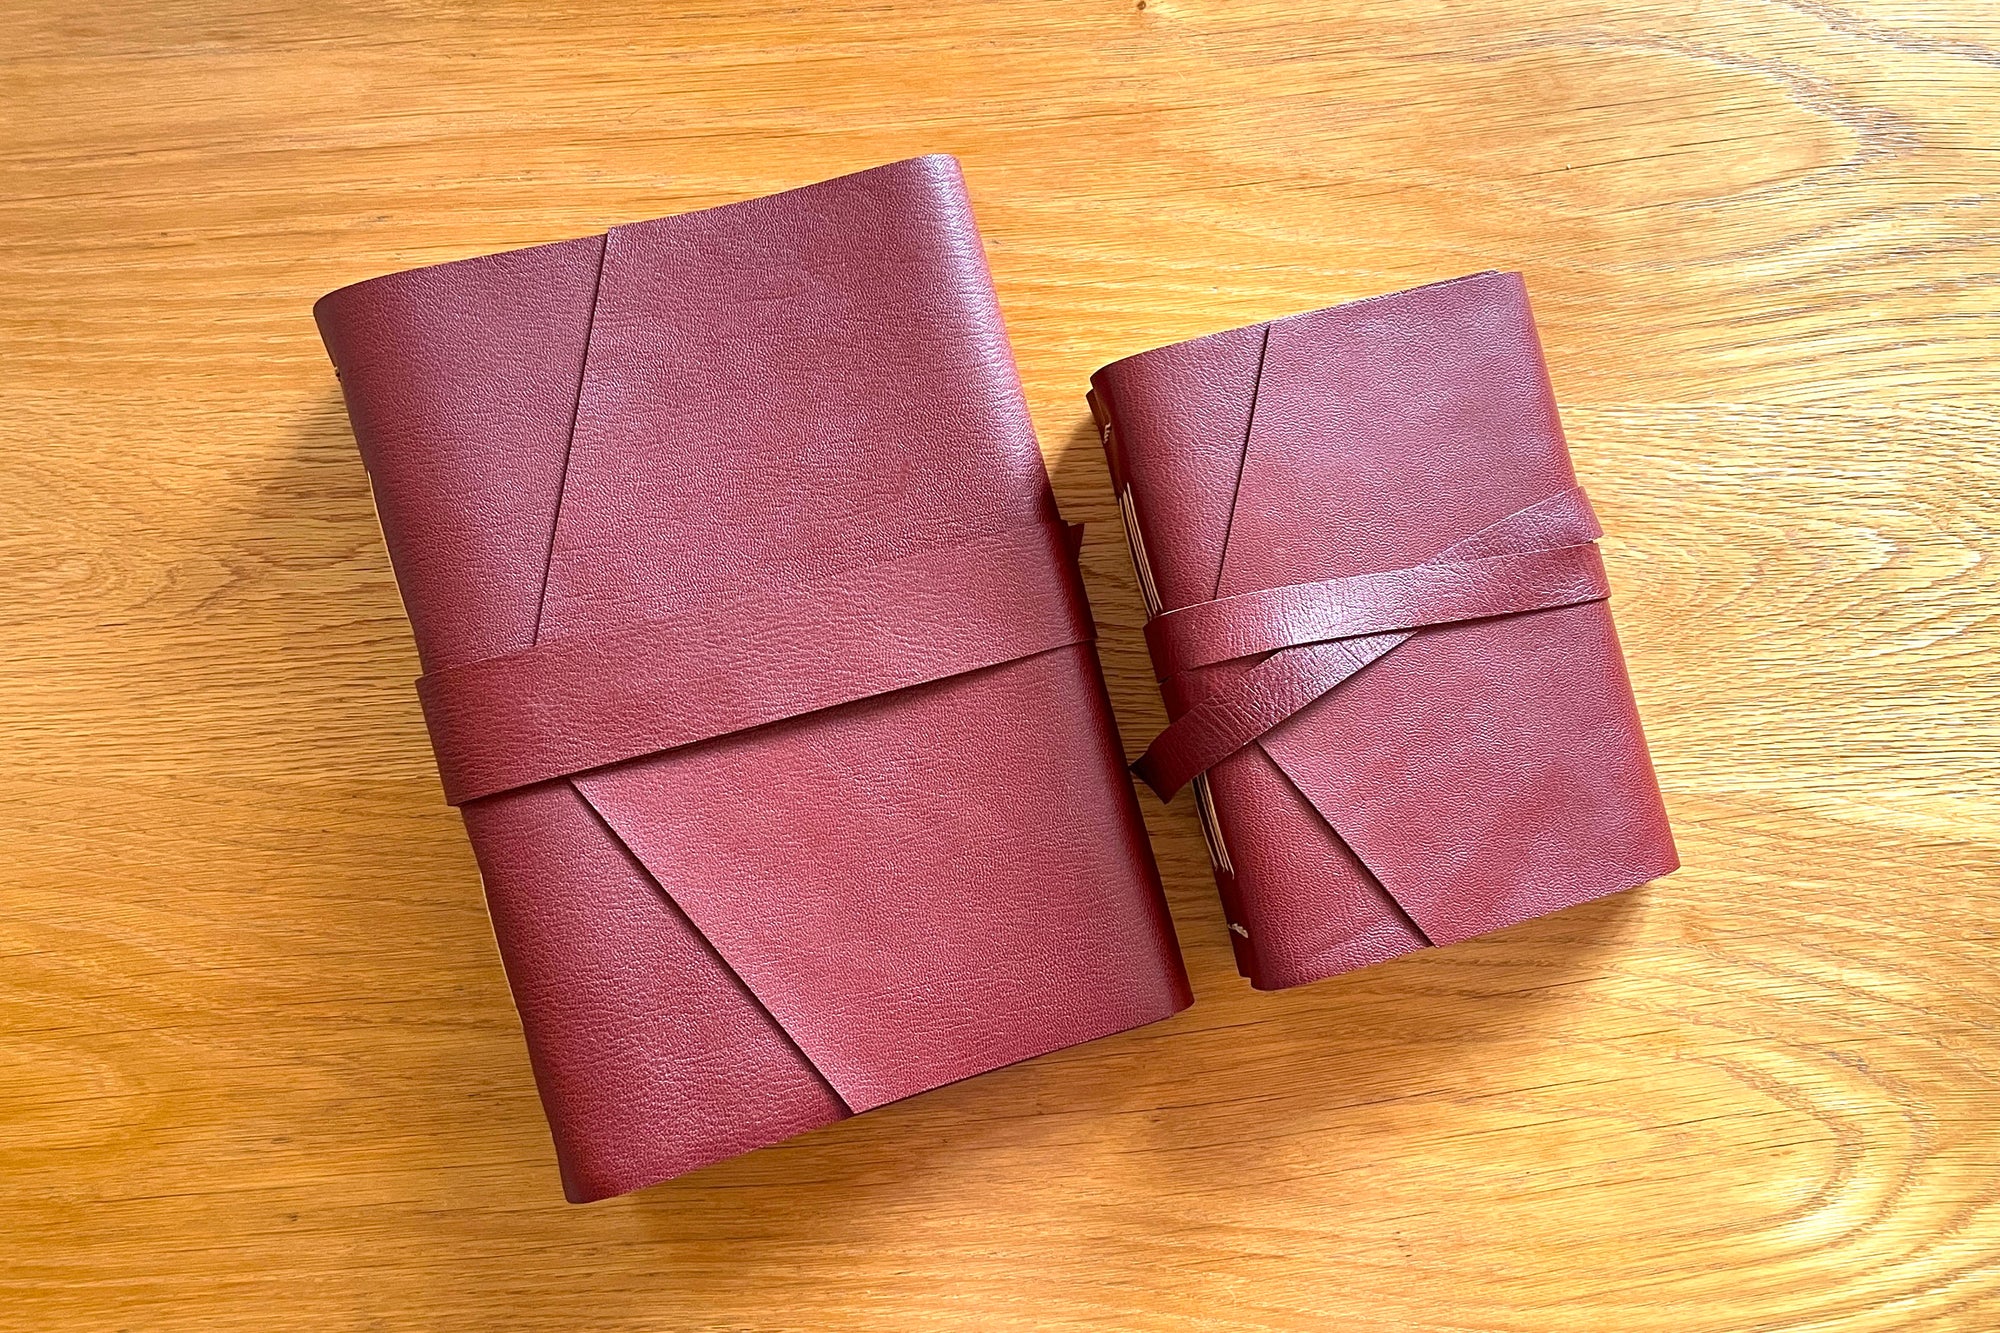 A4 large and A5 medium portrait Oxblood and Tan leather Memory Books